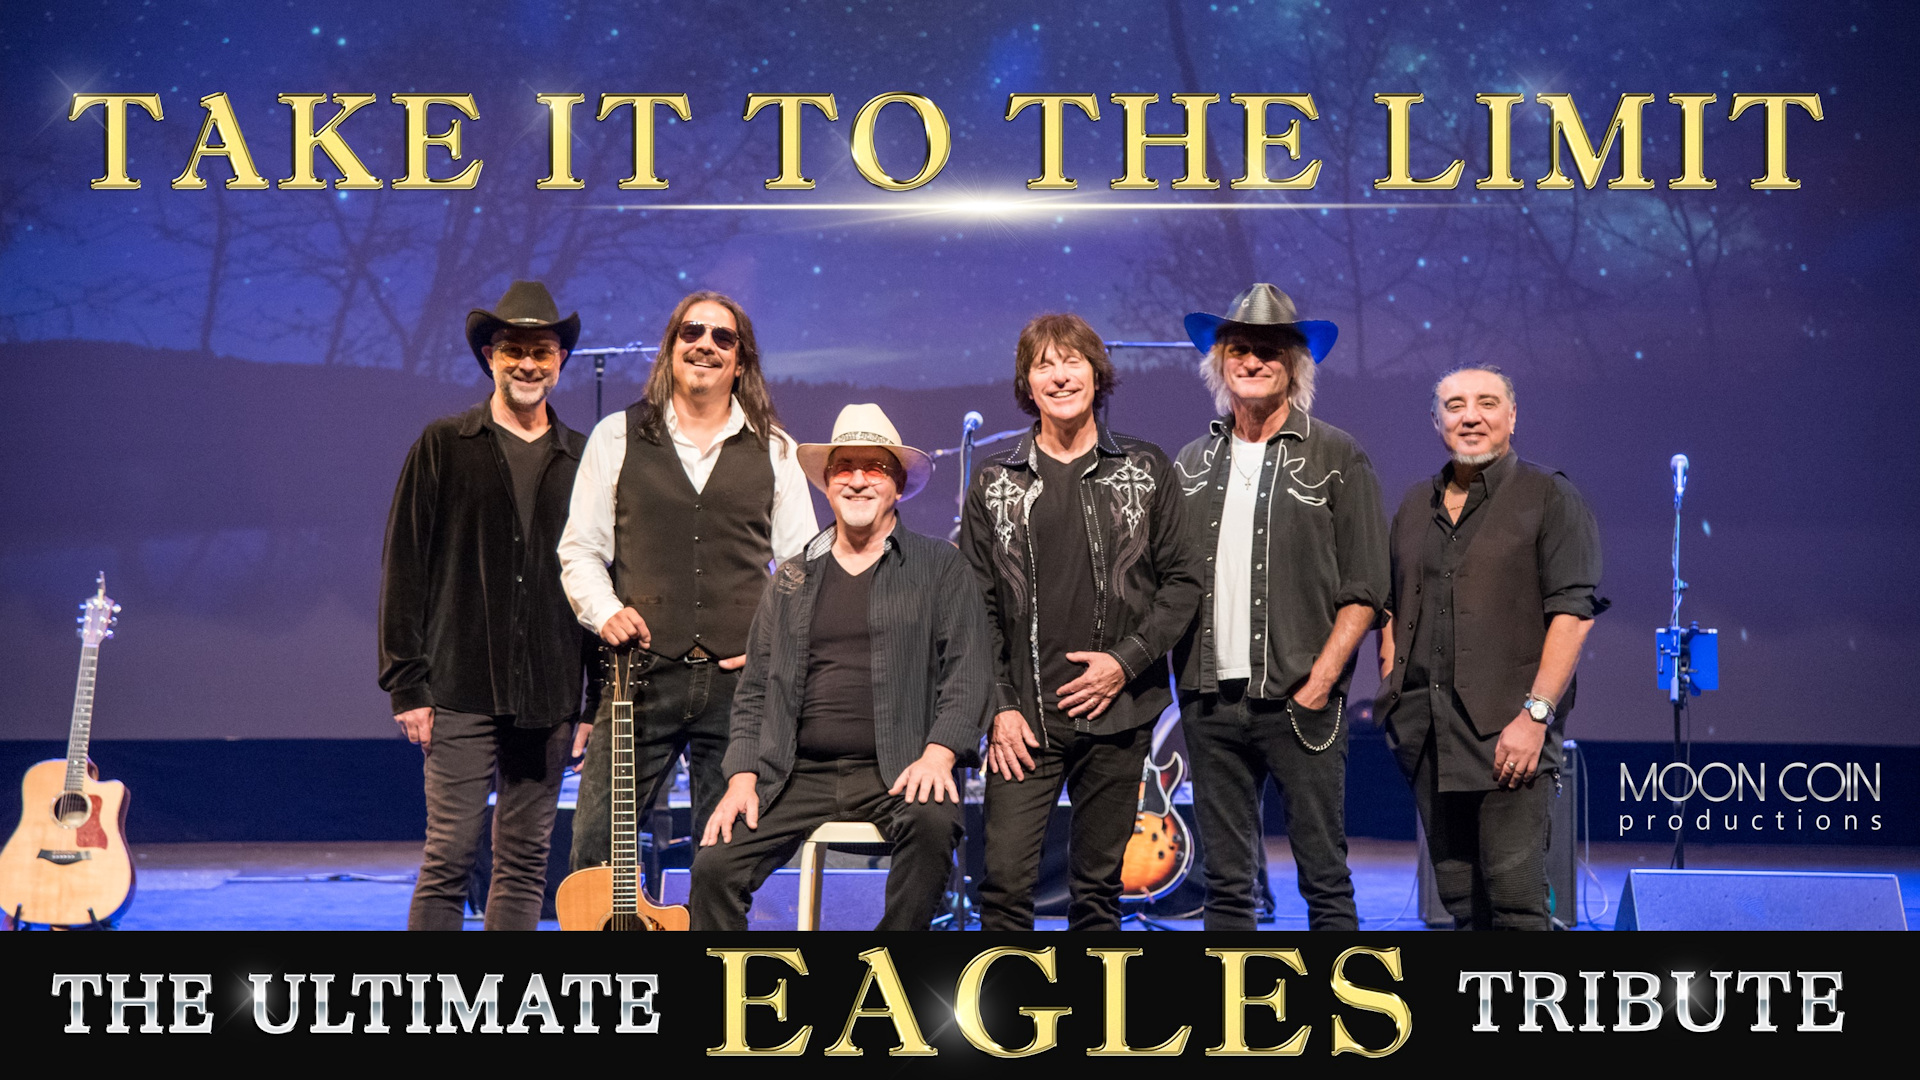 Take It To The Limit - The Ultimate Eagles Tribute